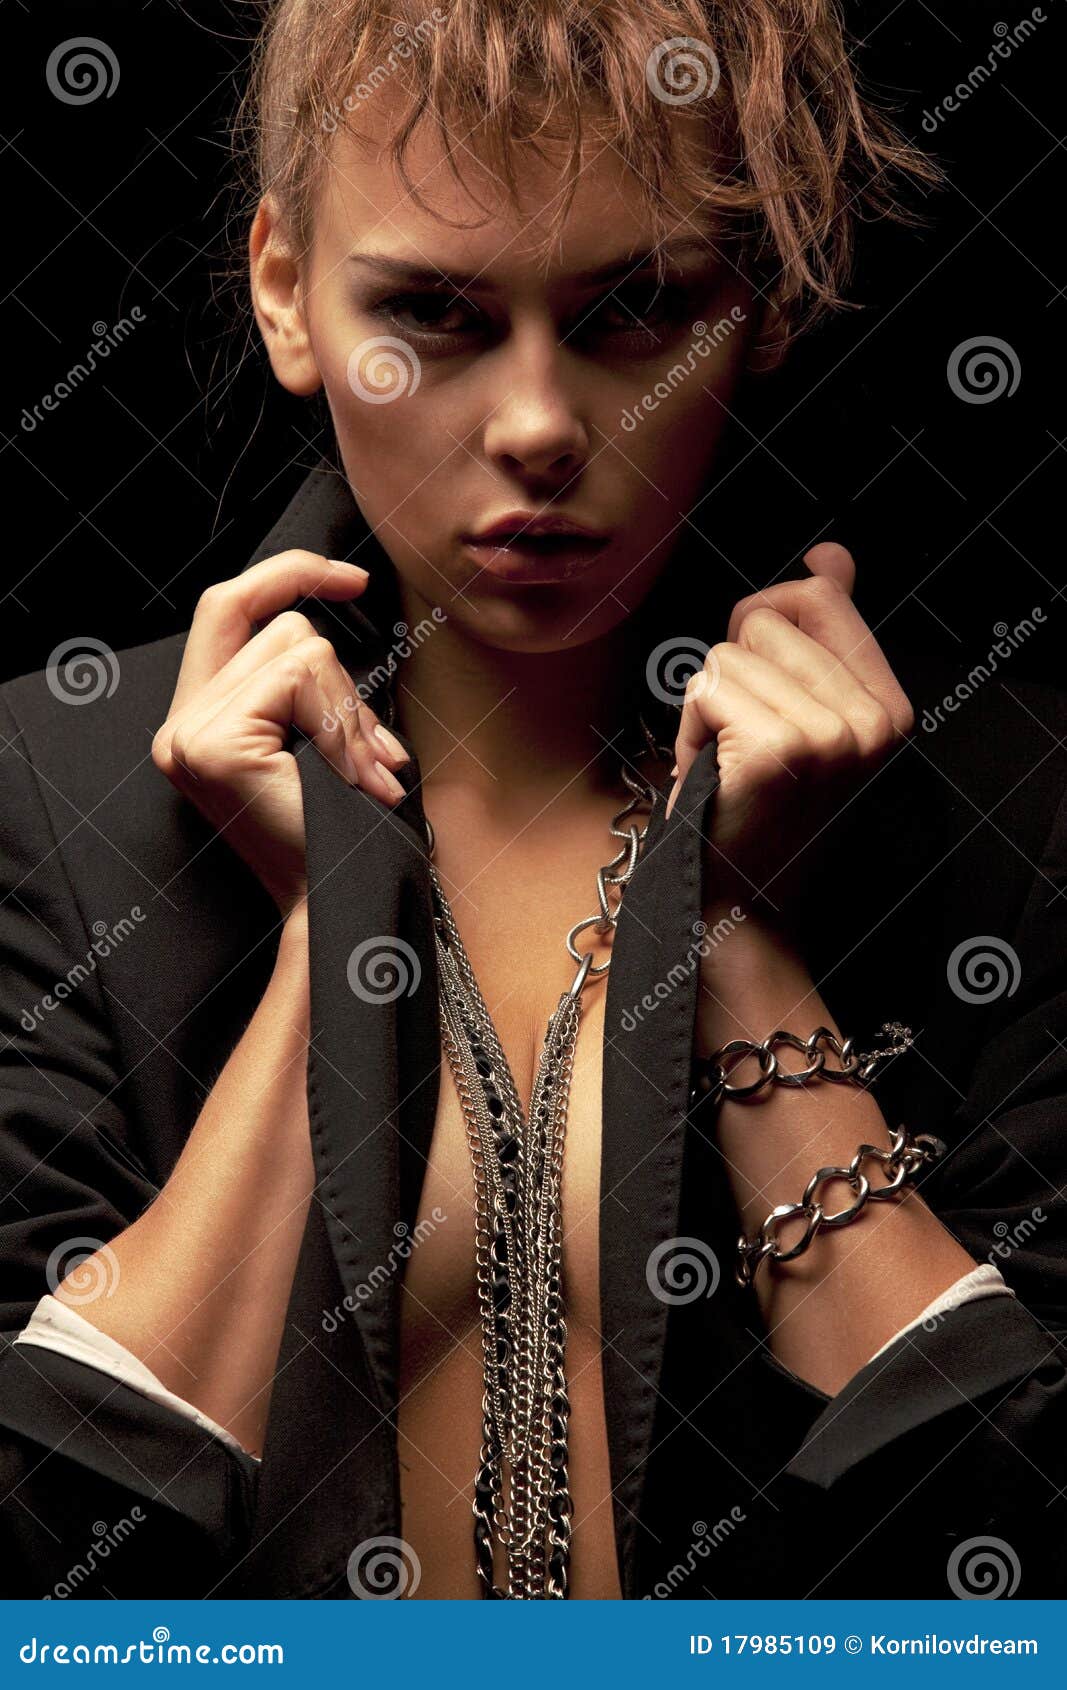 Woman with chains stock image. Image of artistic, black - 17985109